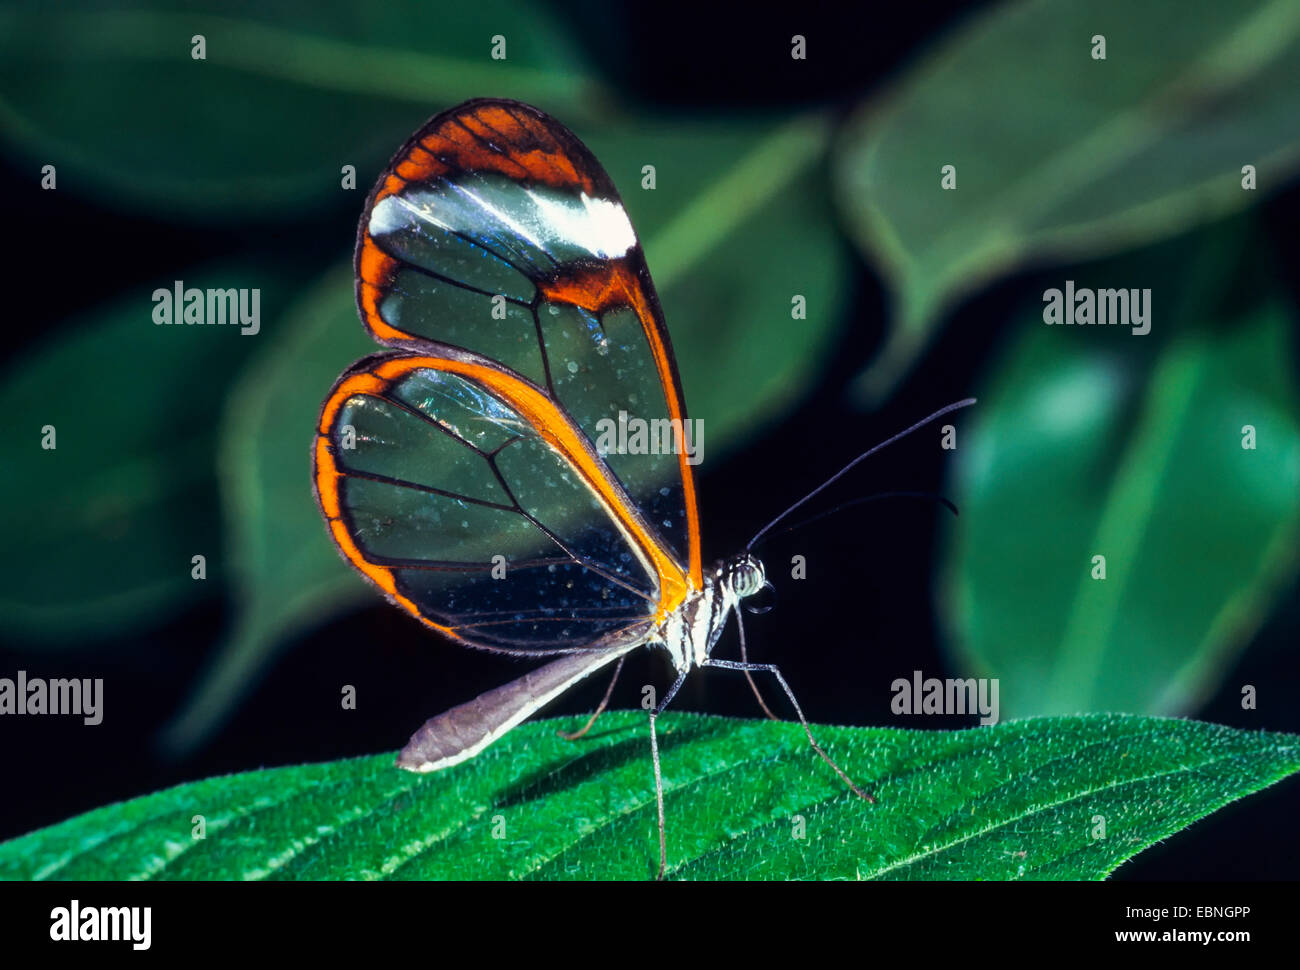 clearwing moths, clear-winged moths (Sesiidae, Aegeriidae), on a leaf Stock Photo